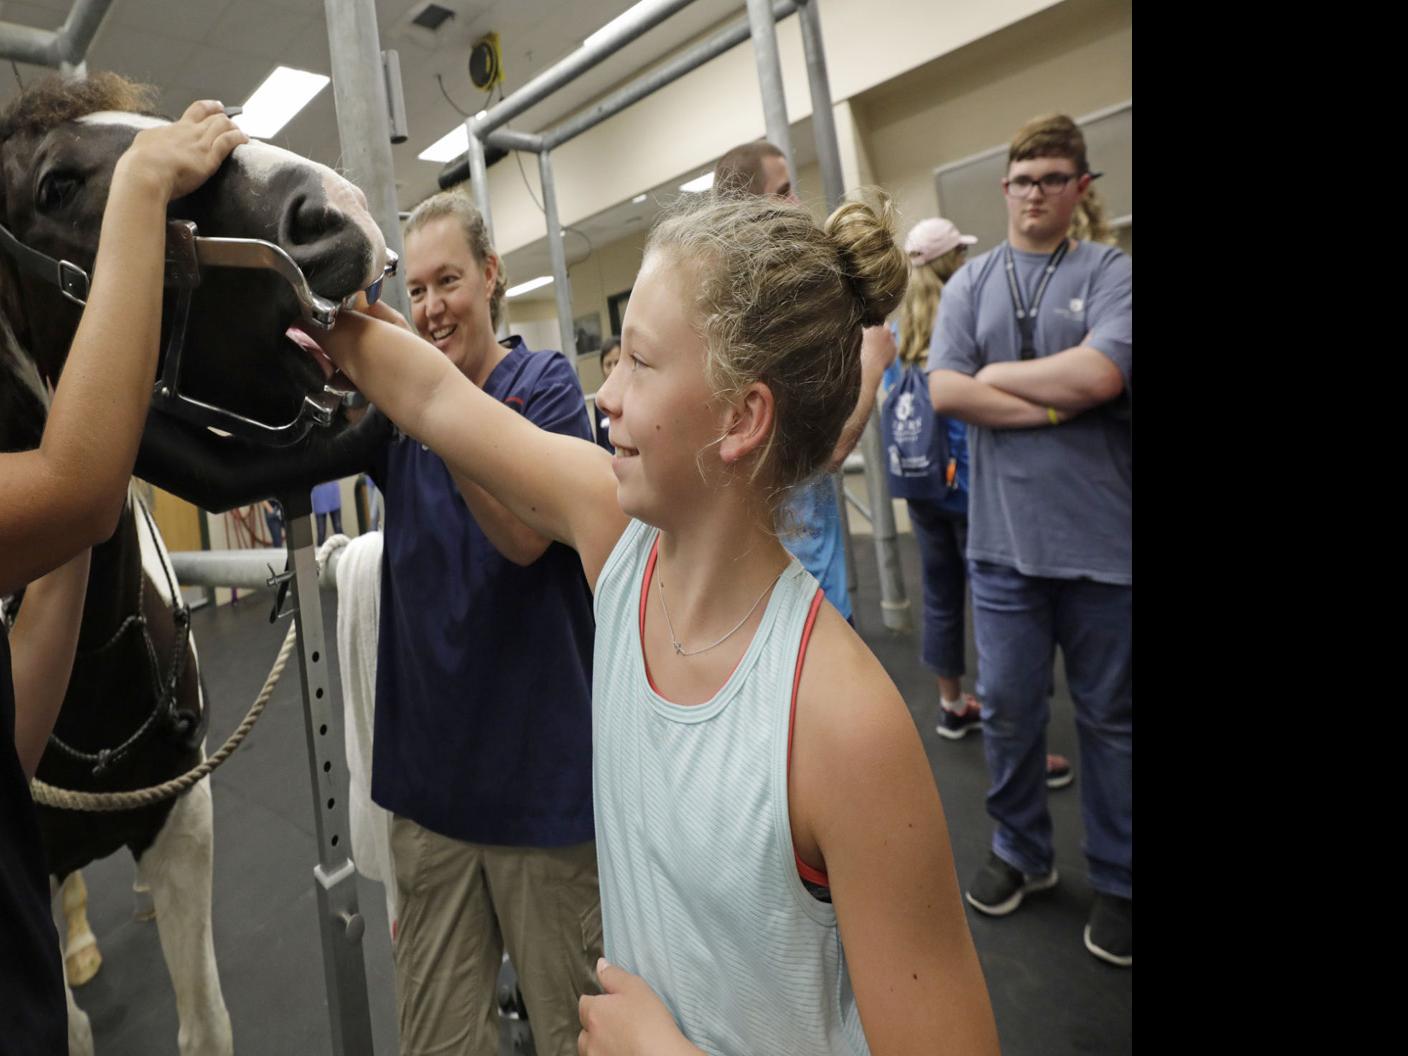 Camp gives kids a glimpse into veterinary science | Latest Headlines |  oanow.com